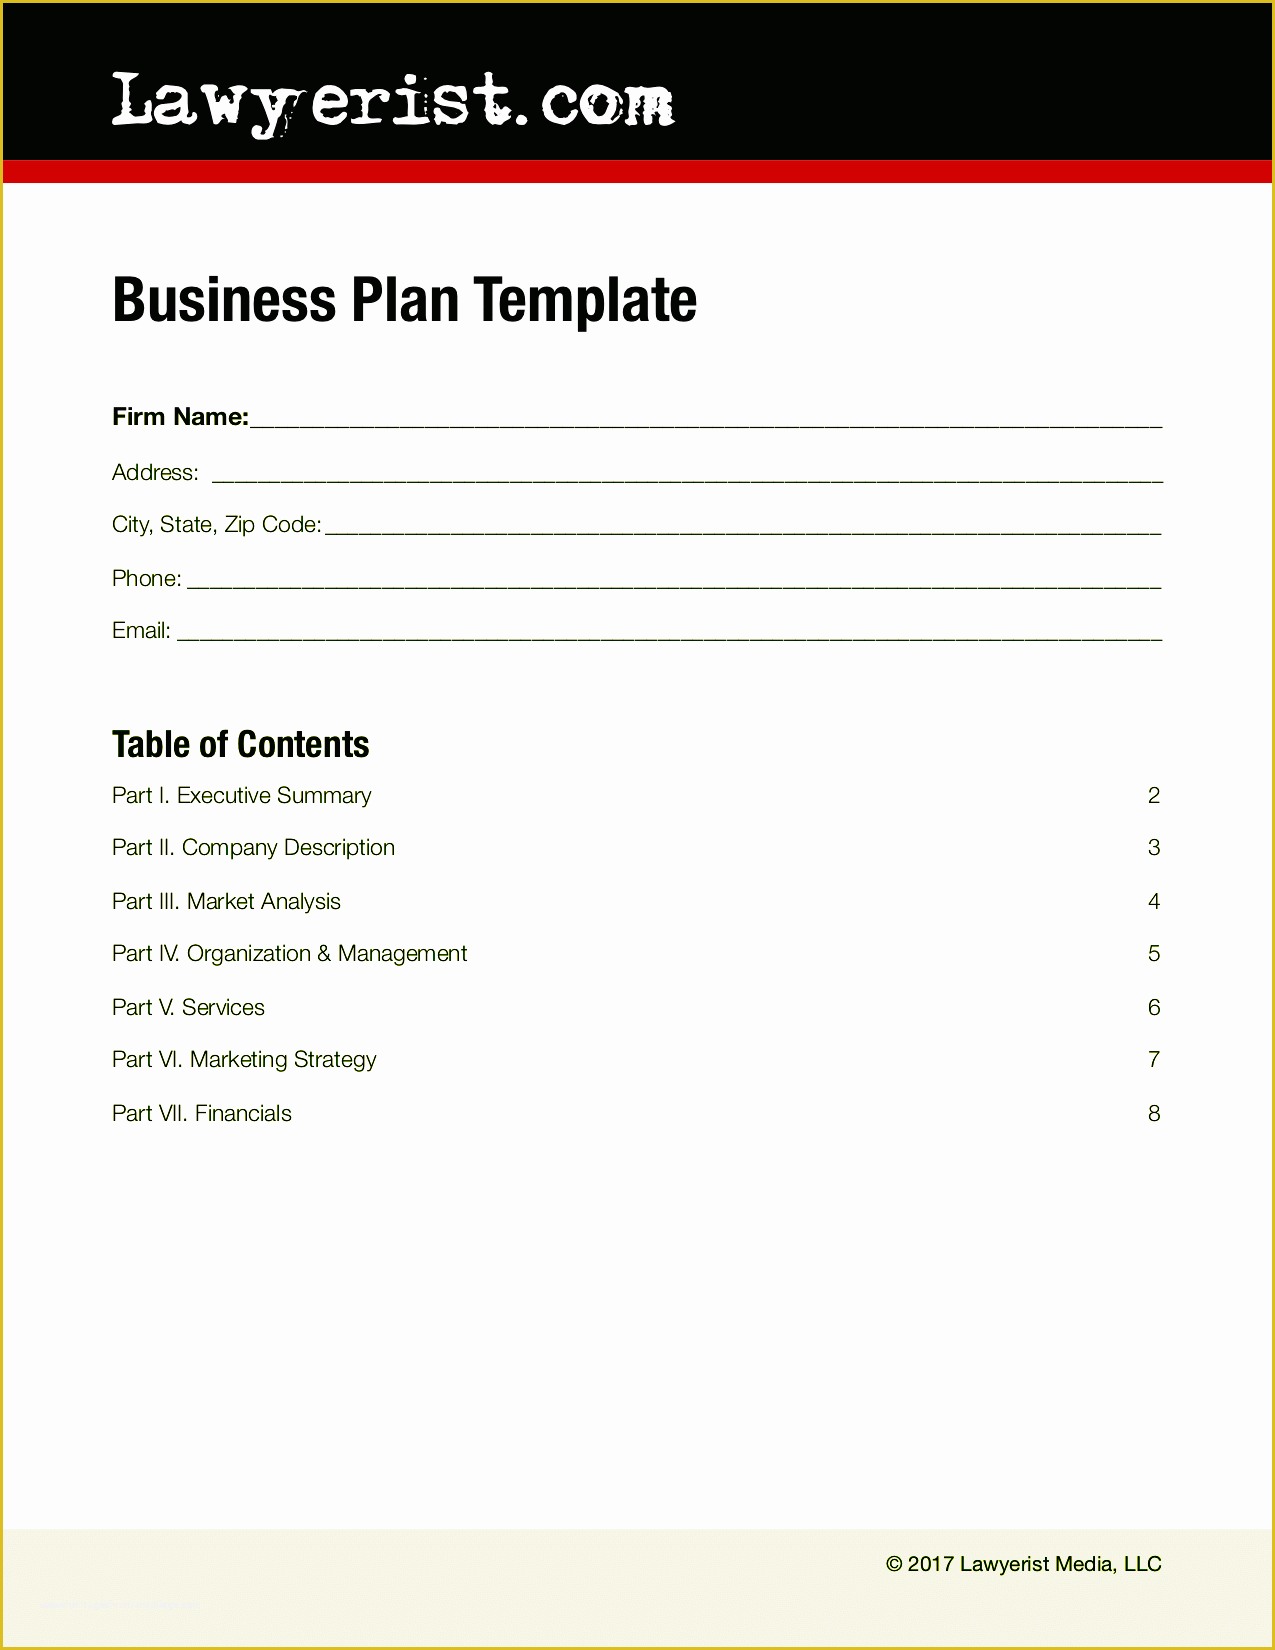 Business Plan Template Free Of Business Plan Template